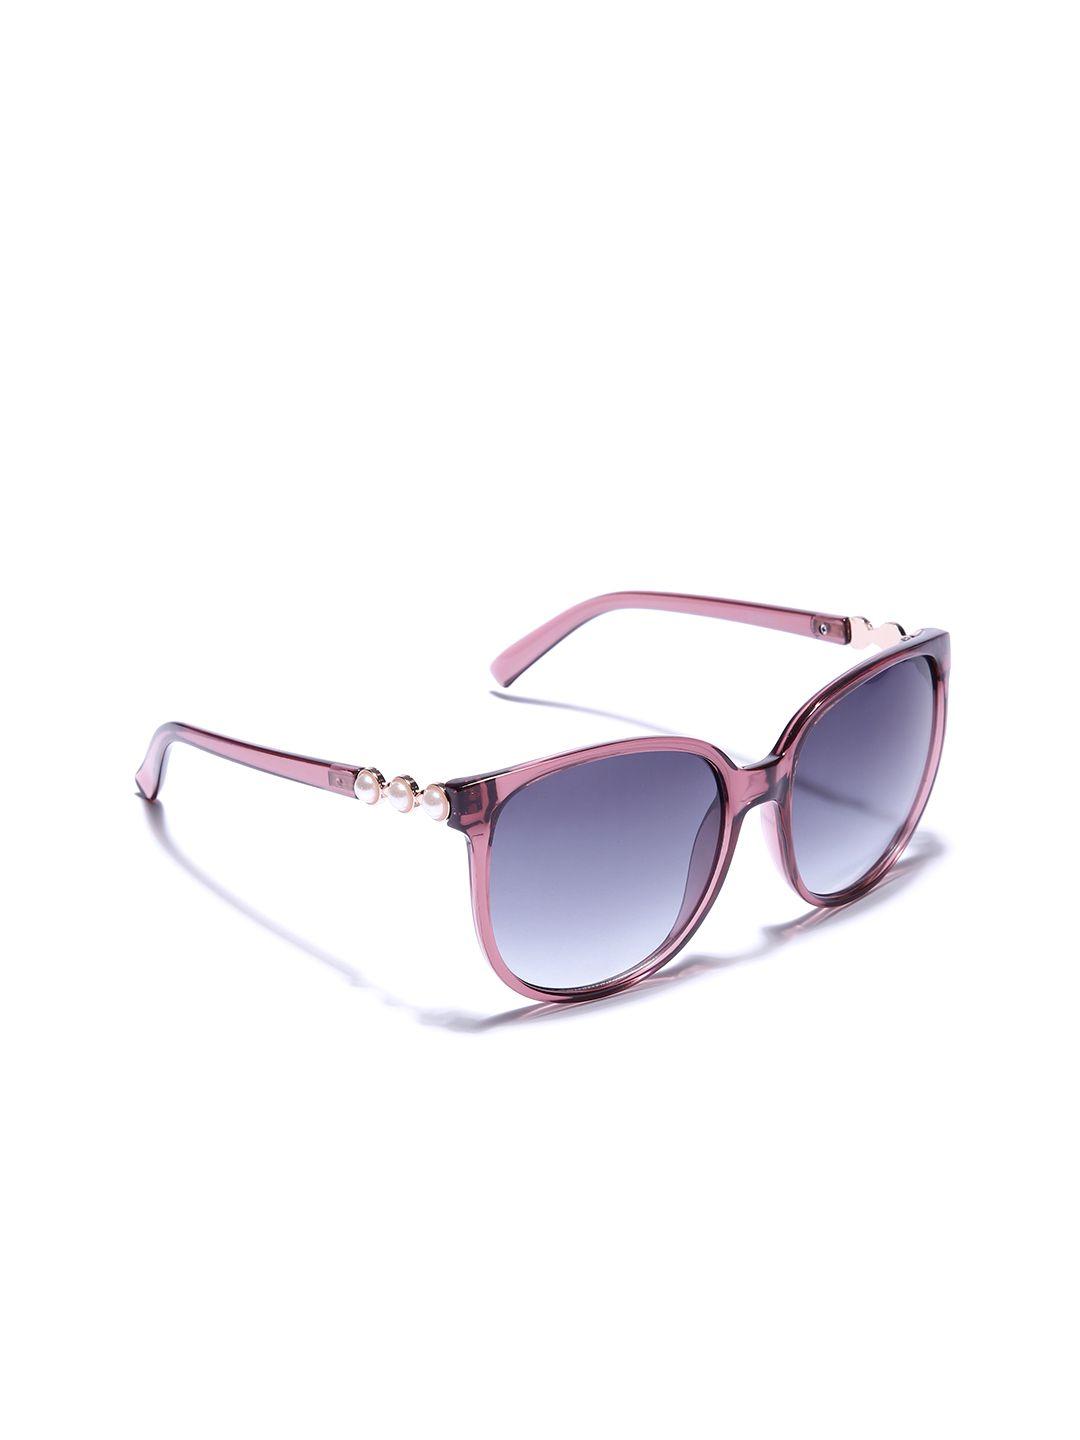 carlton-london-women-square-sunglasses-with-uv-protected-lens-clsw180